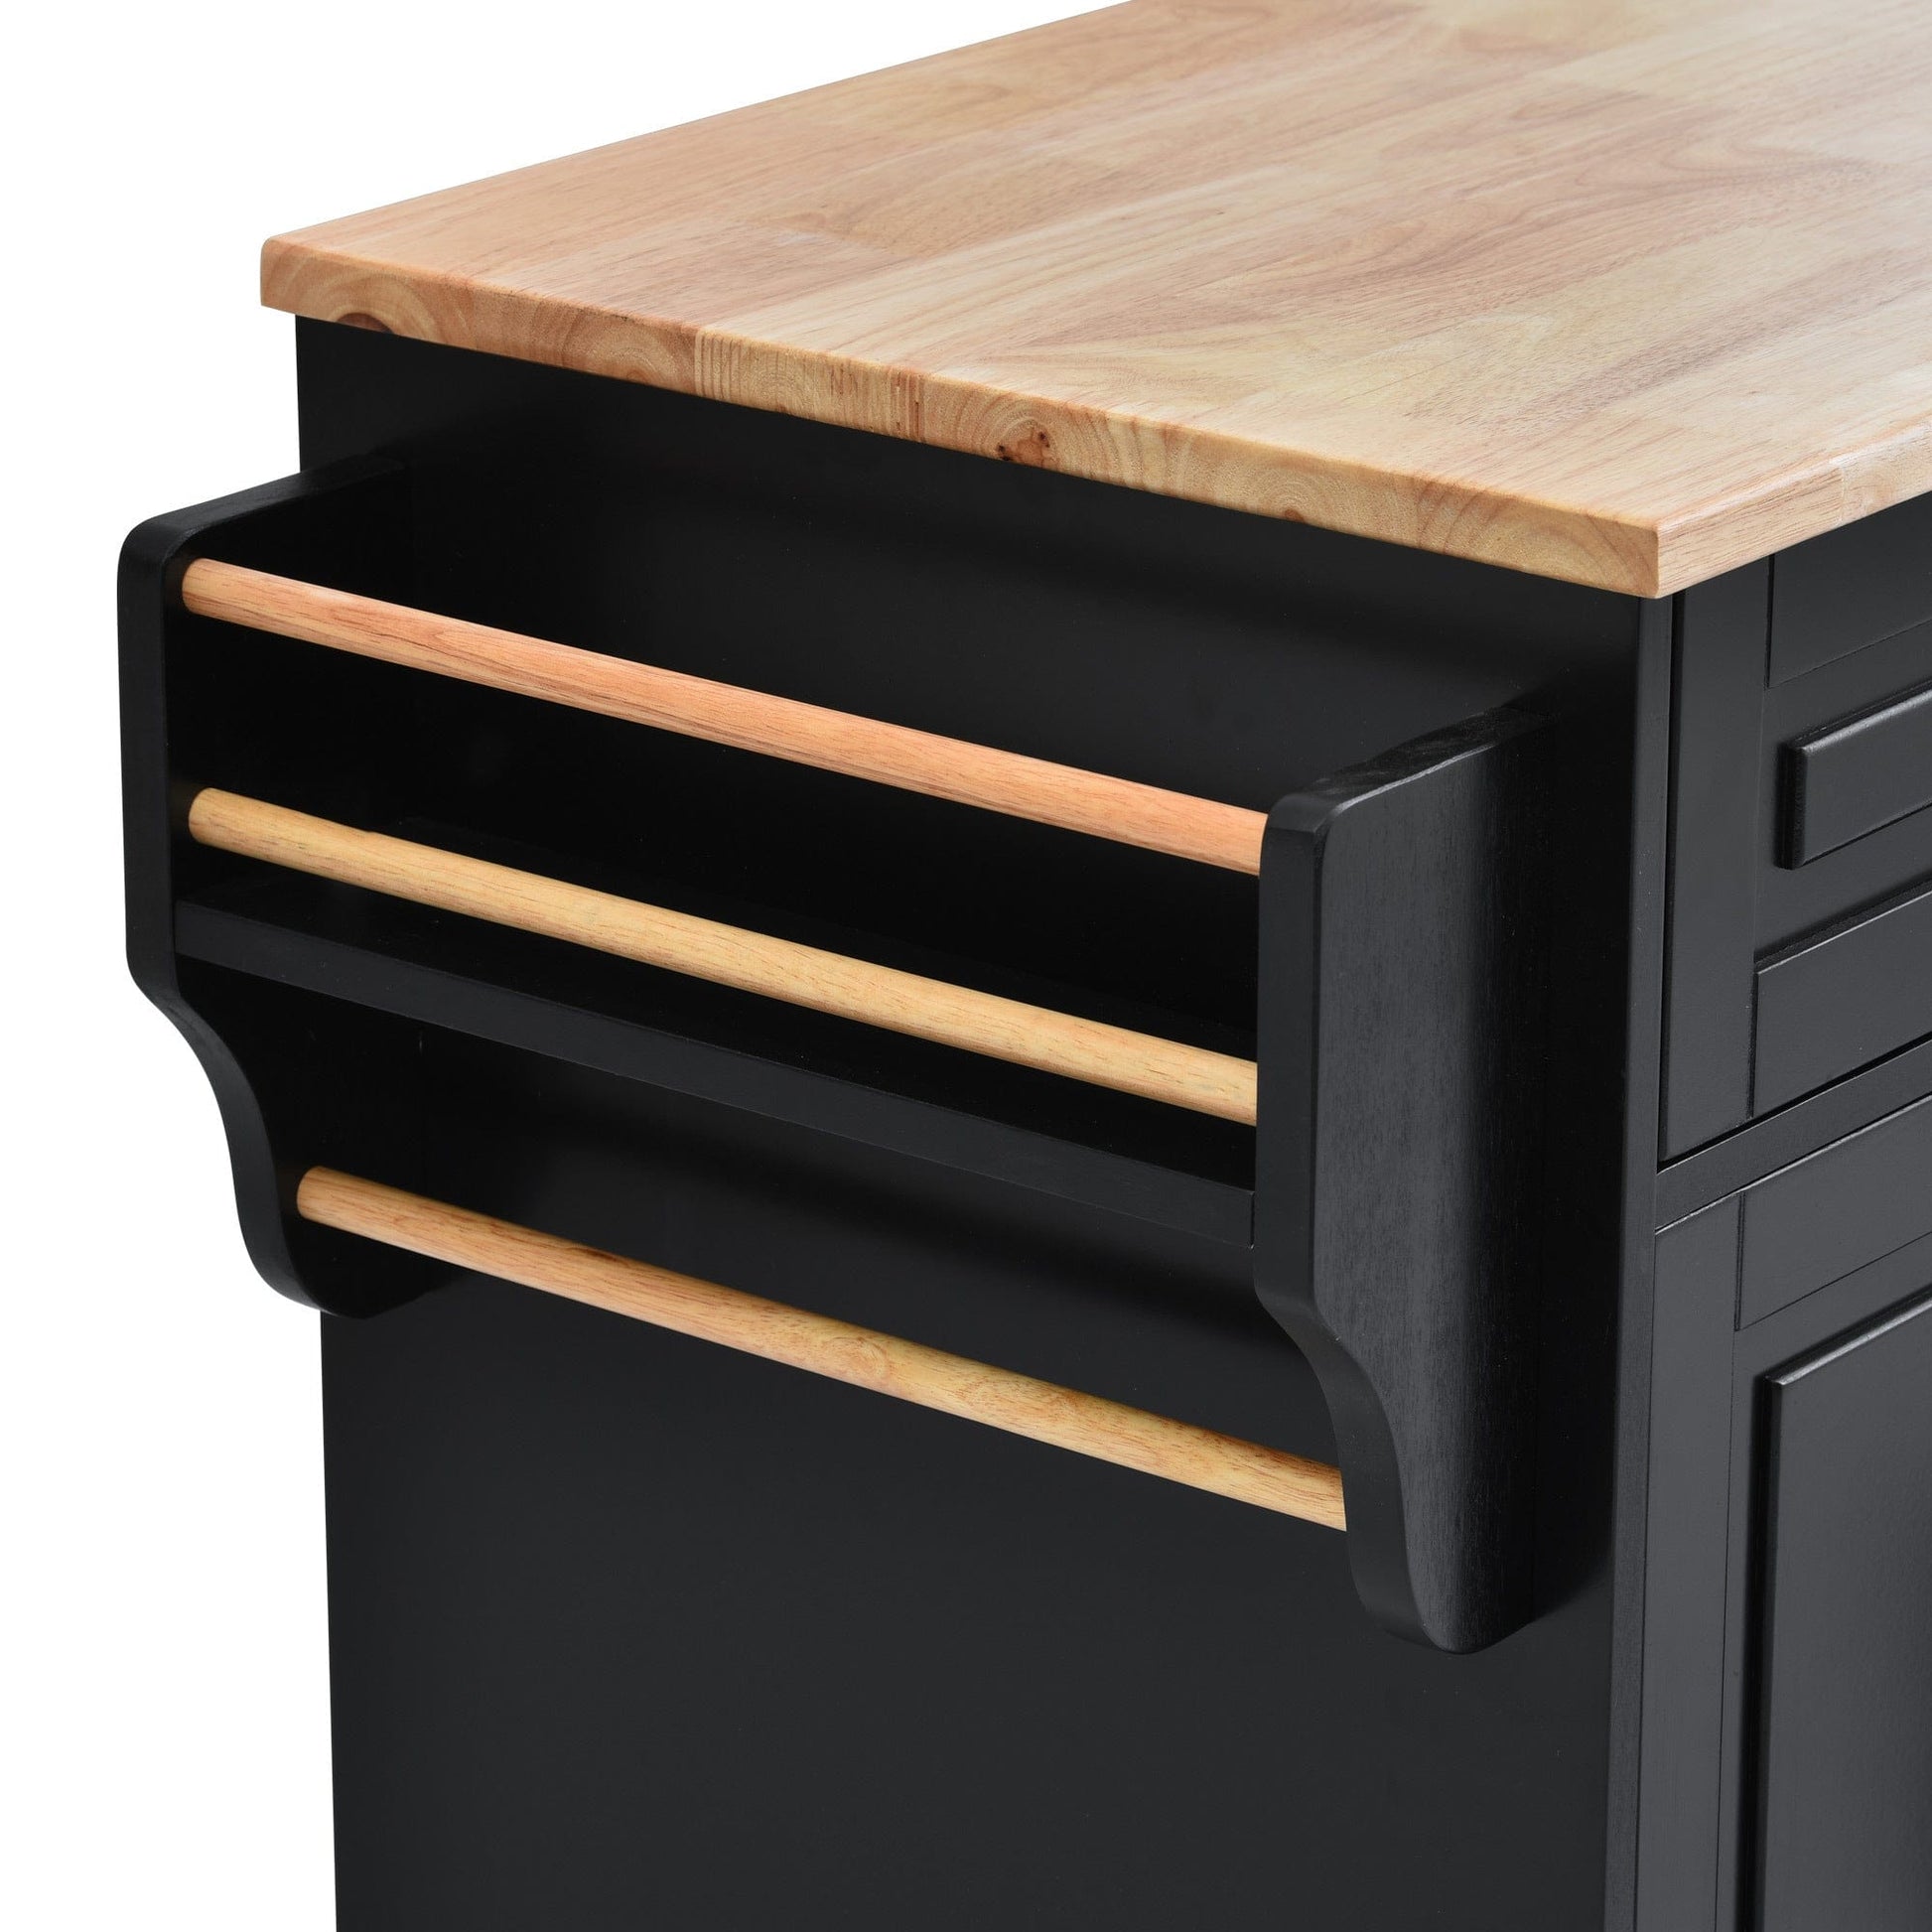 1st Choice Furniture Direct 1st Choice Versatile Rolling Mobile Kitchen Island Cart with Storage